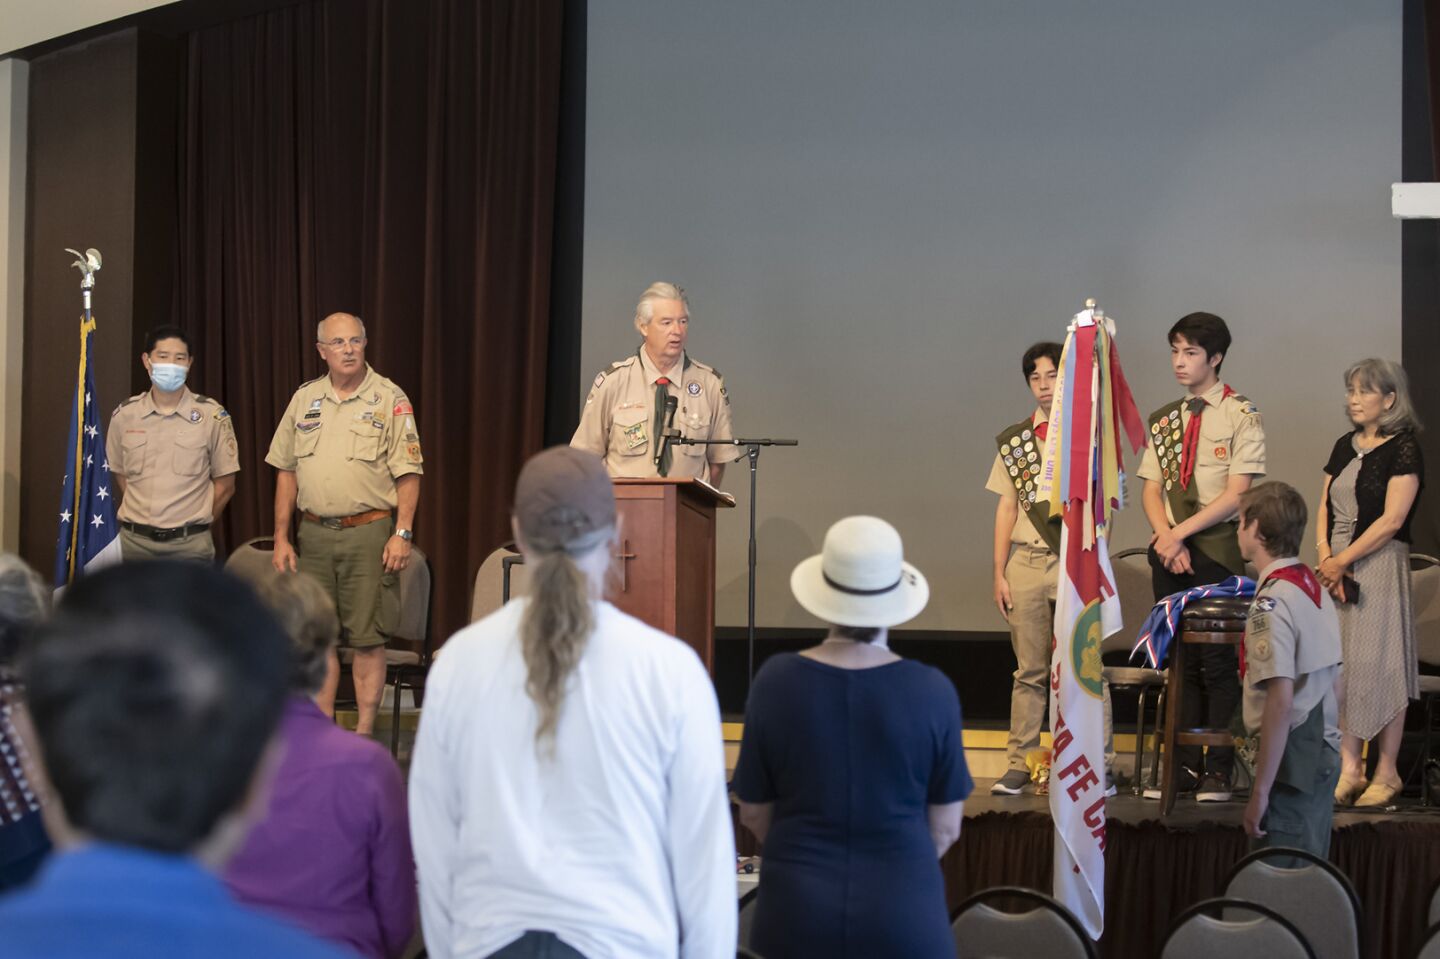 Chris Kwok (Scout Master Troop 766), Jack Cater (Zone Representative & Eagle Project Counselor), Gene Marsh (Scout Master Troop 2000), Eagle Scout candidate Daniel Scuba, Eagle Scout candidate David Scuba, Linda Leong